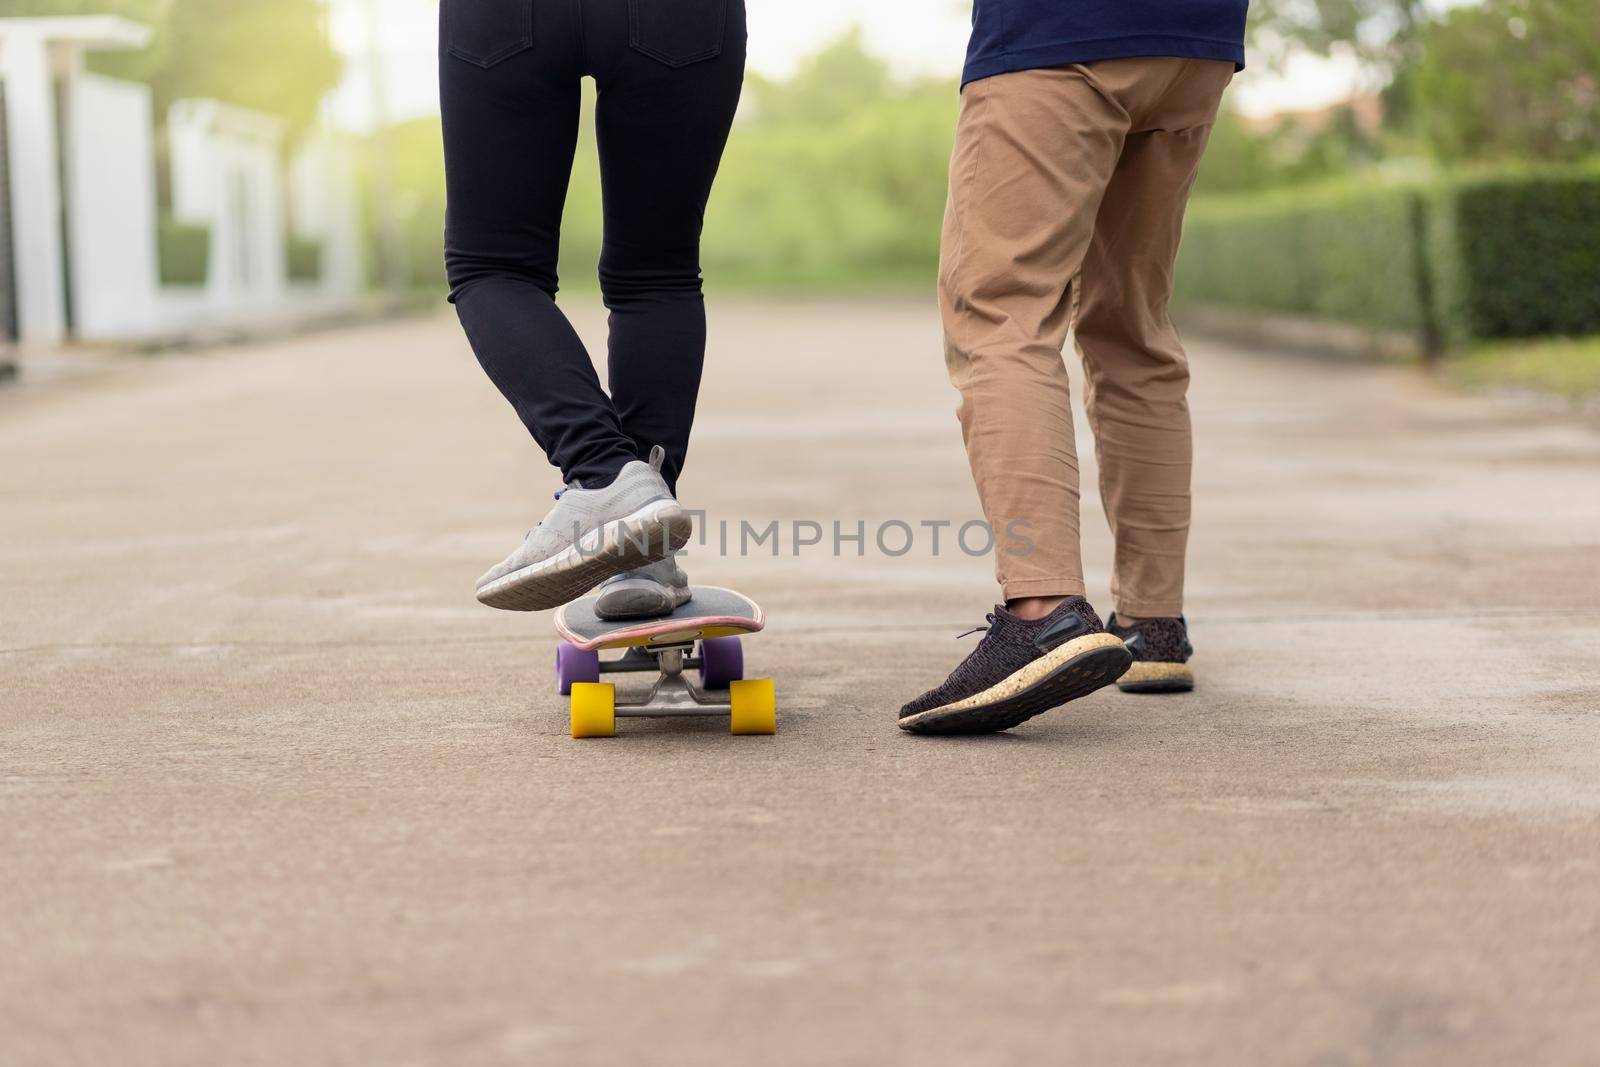 Woman practice on surfskate in park by toa55